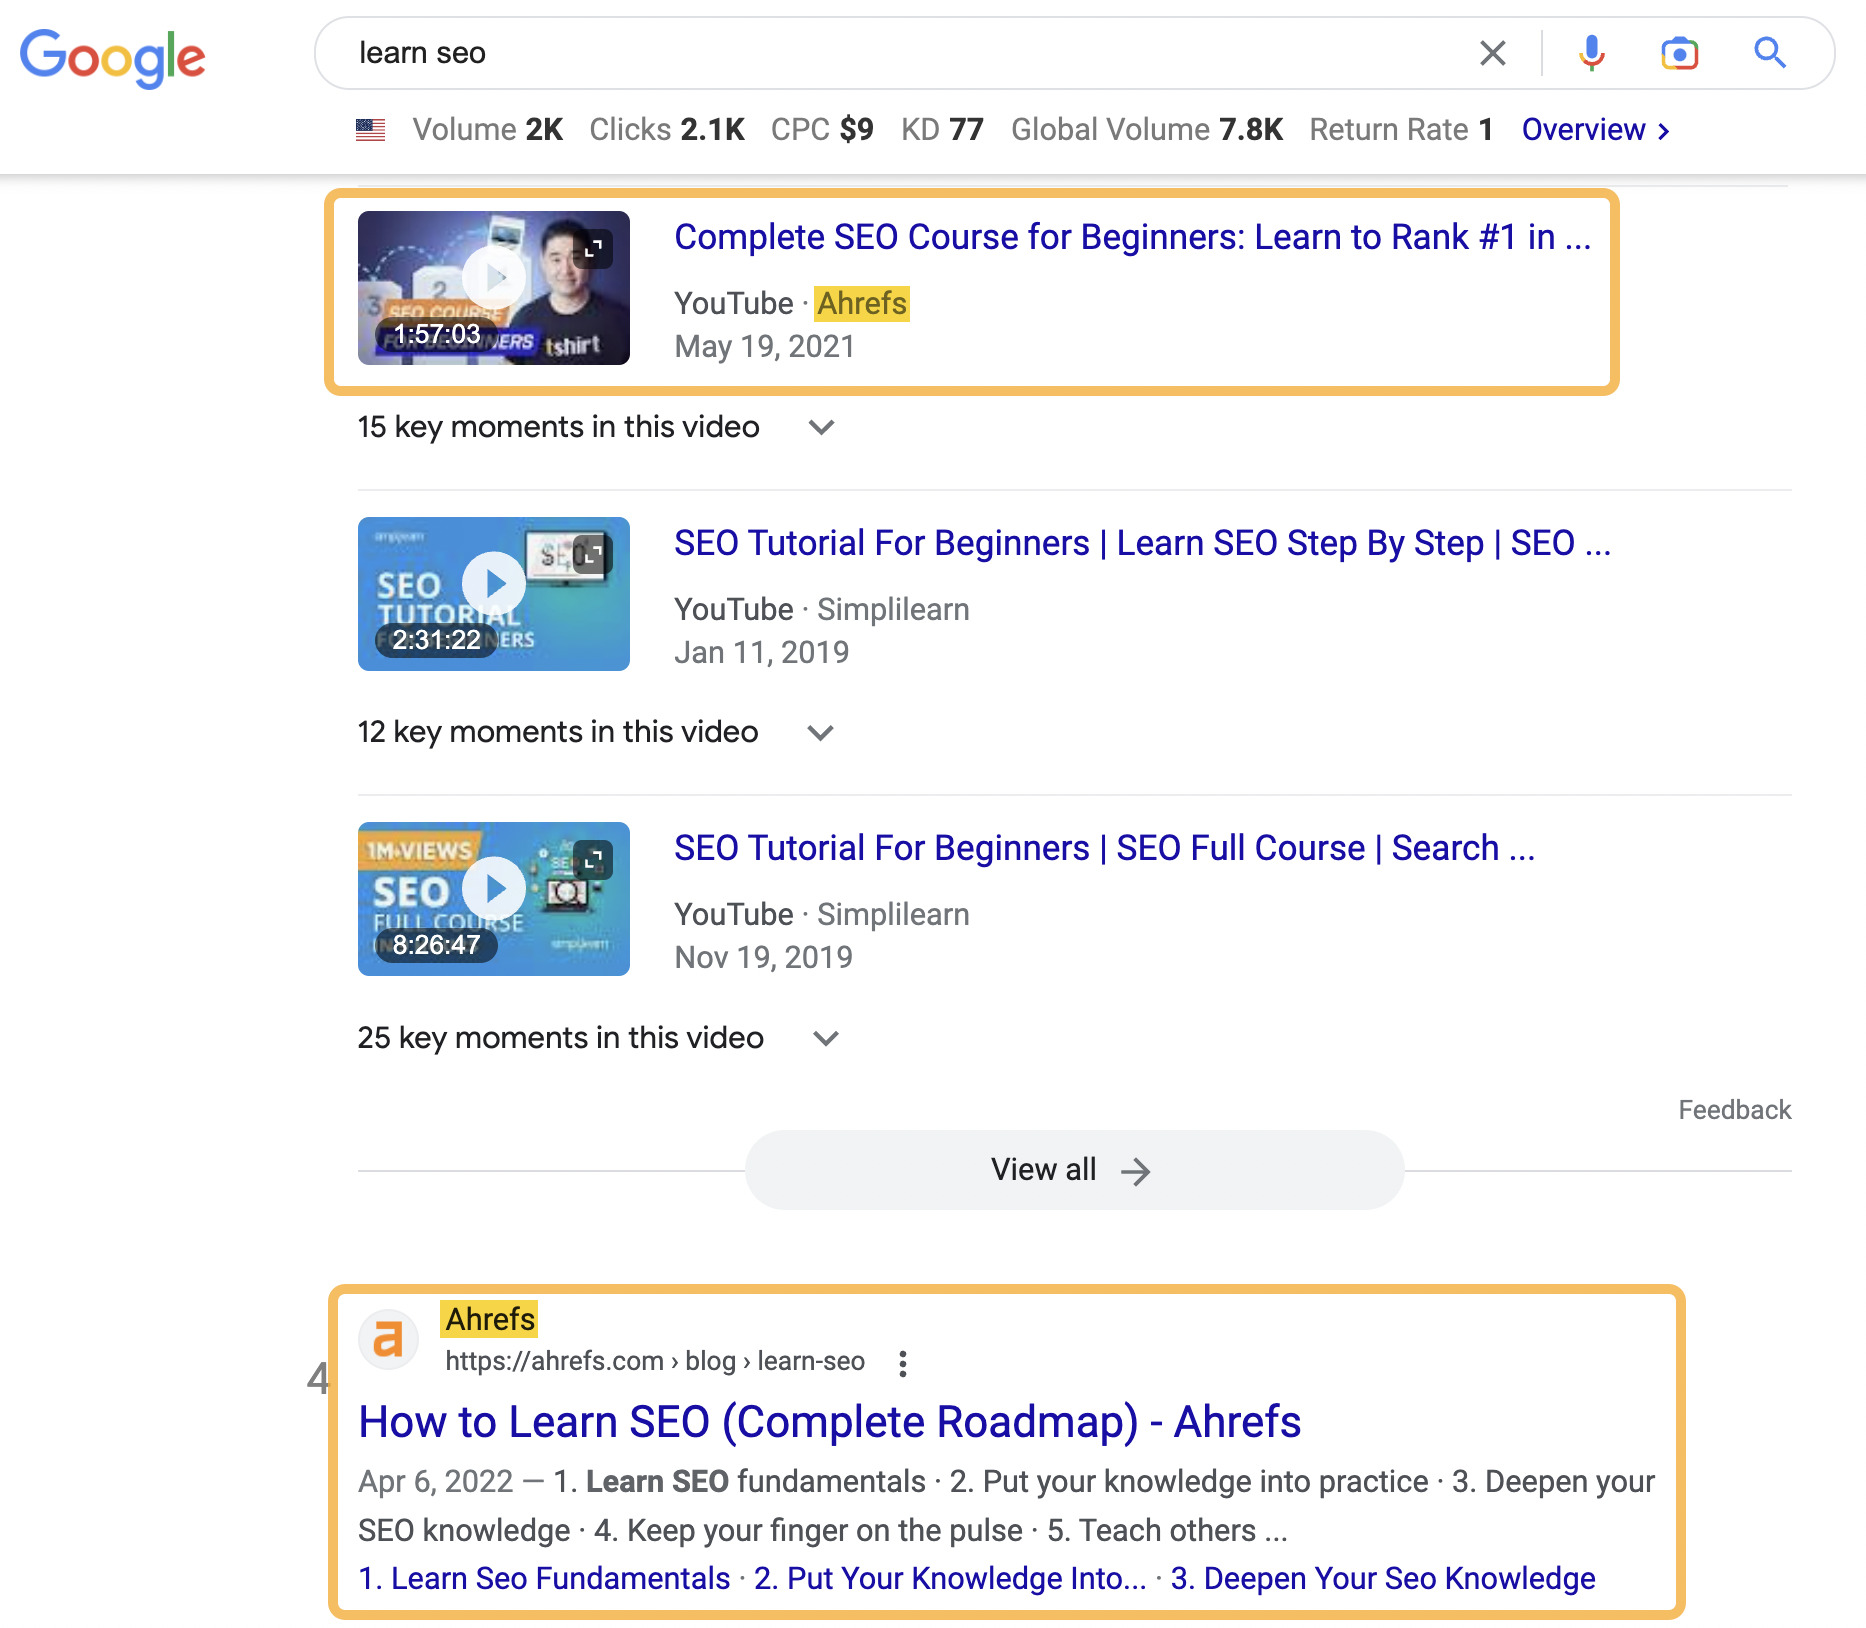 SERP results for "learn seo" showing both a YouTube video and blog post from Ahrefs